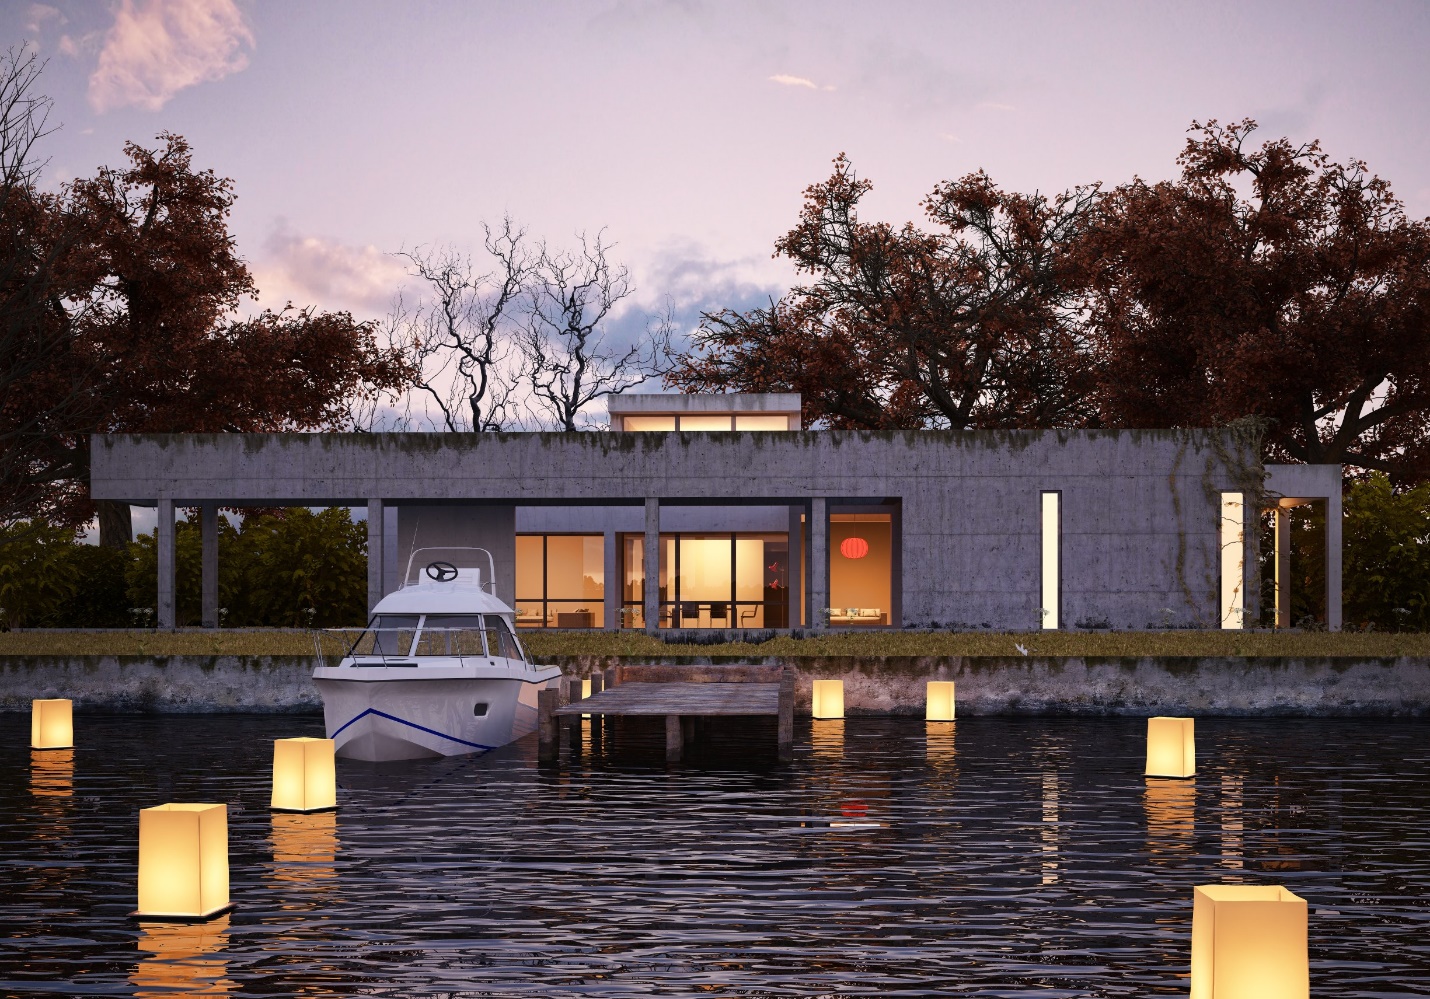 Looking for a Boat for Your Lake House? These are the Best Boat Types for Lakes